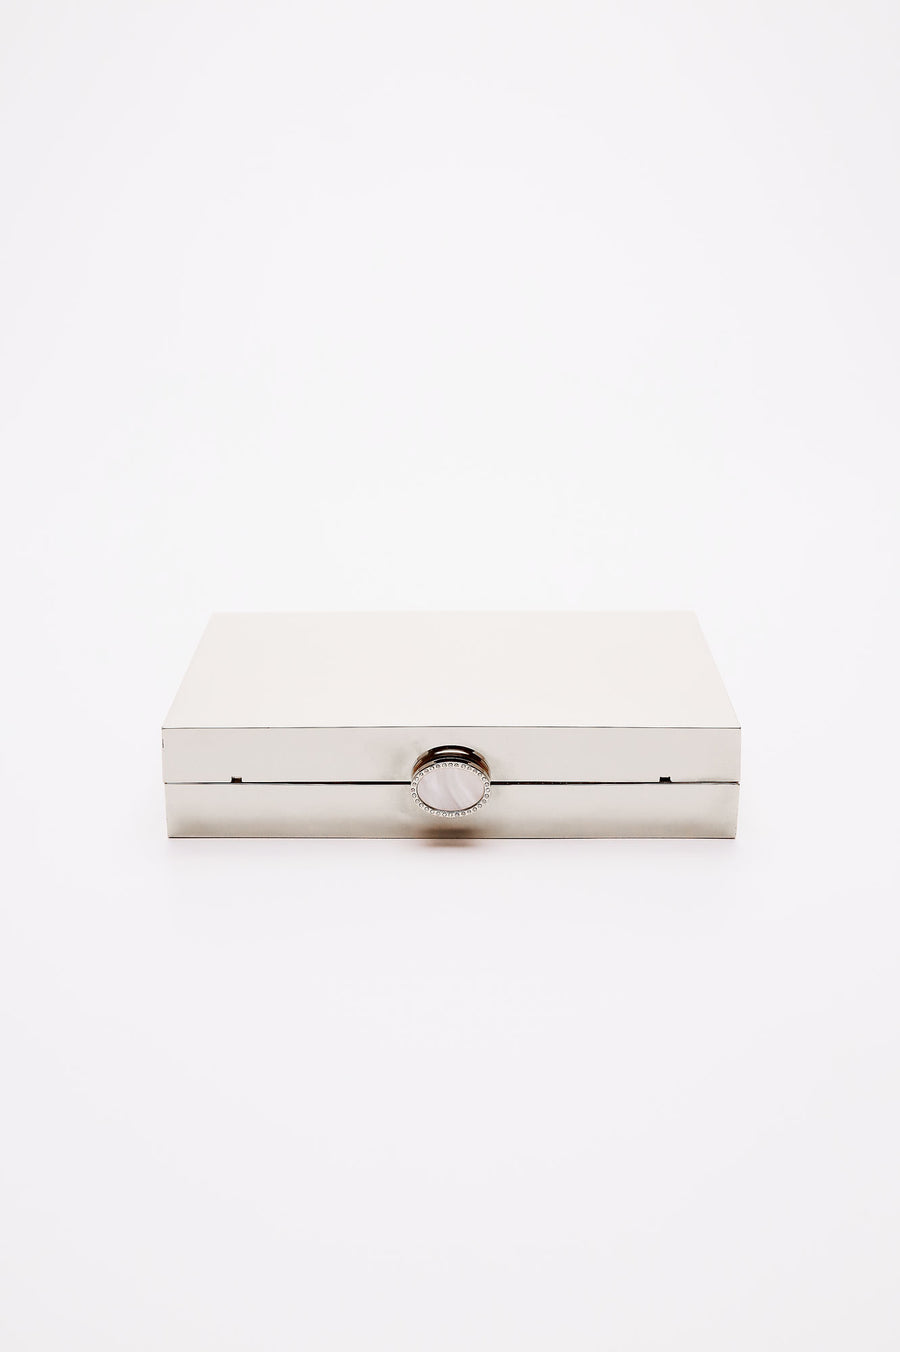 Talich clutch in reflective silver mirror laying on its side, showing the top clasp with a mother of pearl and crystal lined clasp.